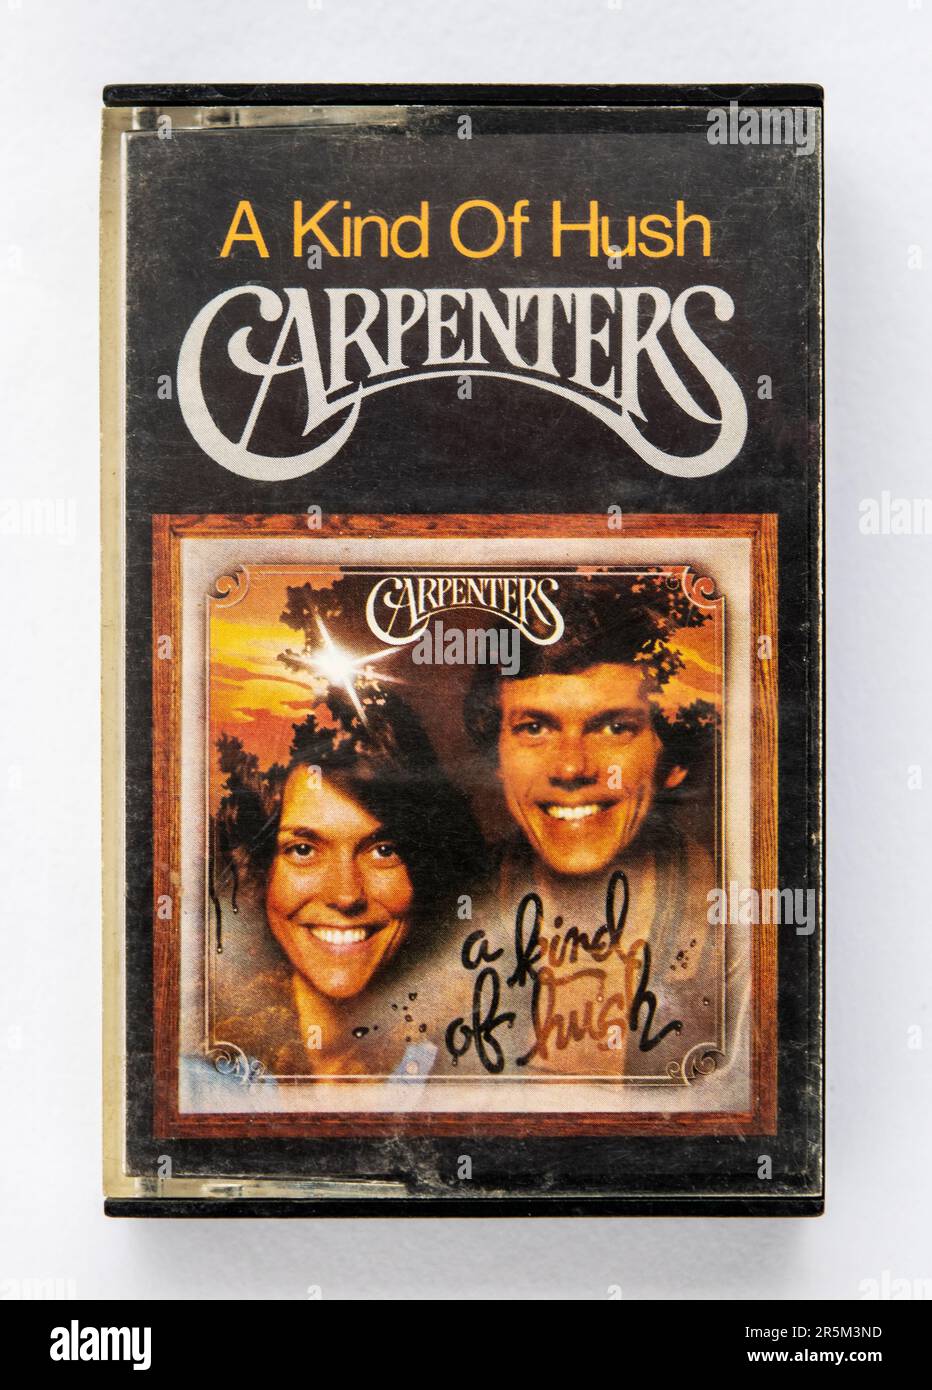 Audio cassette of A Kind of Hush, the seventh studio album by the Carpenters, which was released in 1976 Stock Photo